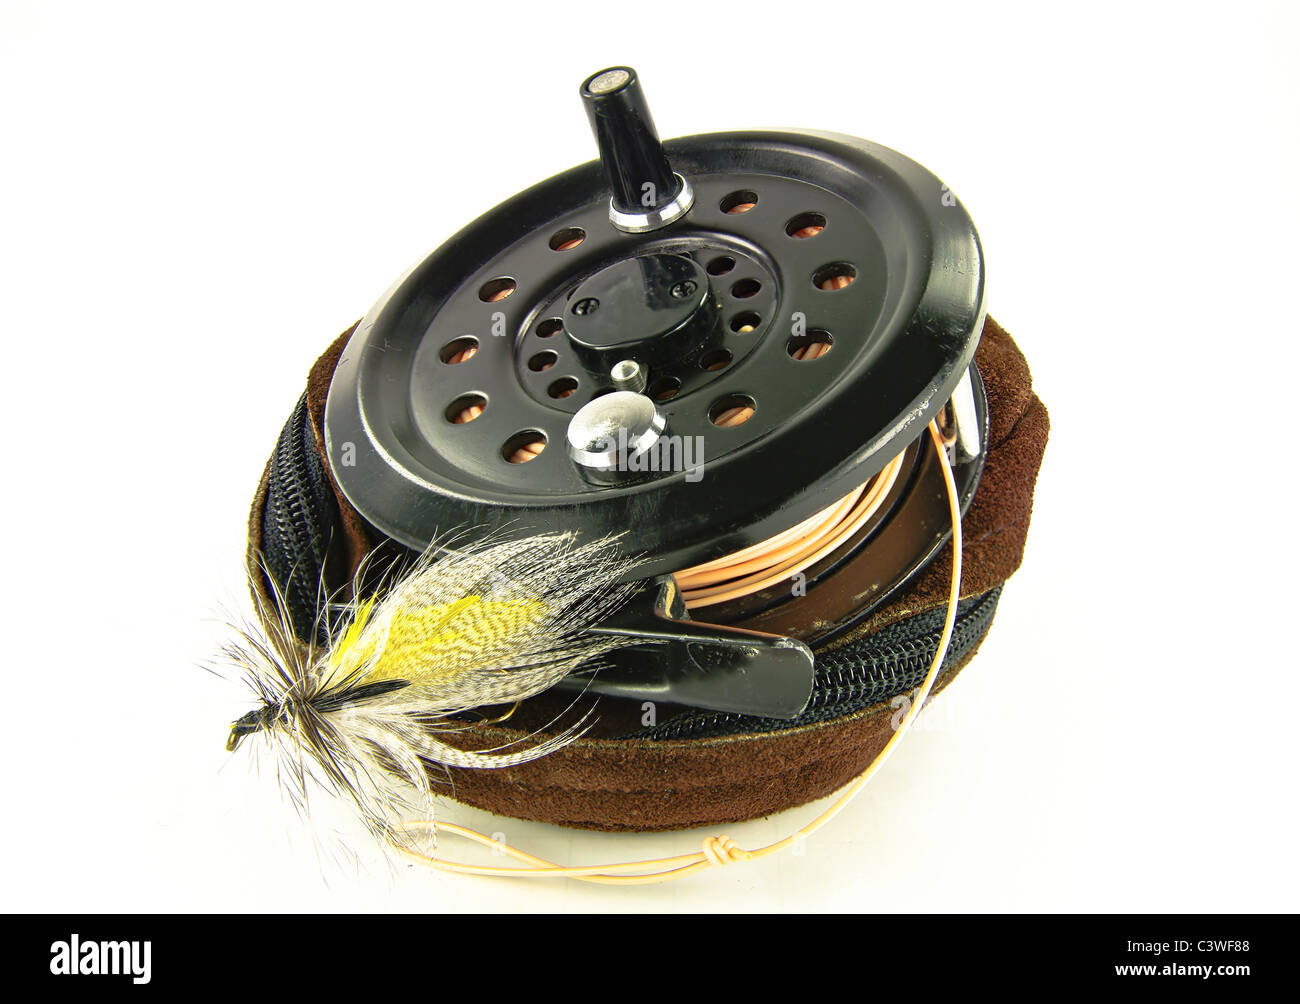 Fly Fishing Reel: A well-used fishing reel sits atop its leather case along  with a lure made for fly-fishing Stock Photo - Alamy